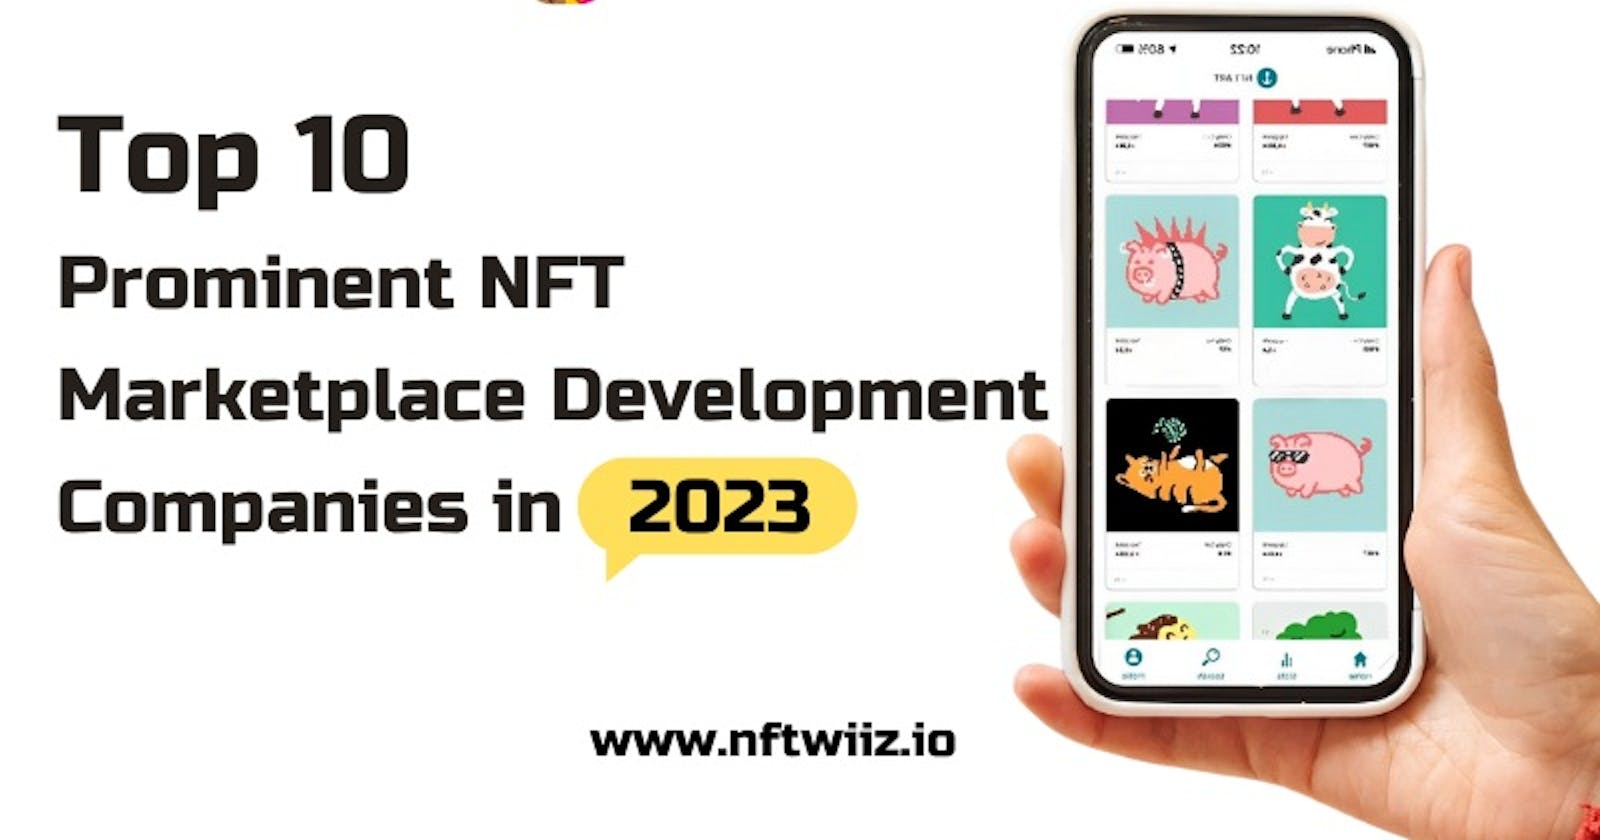 Top 10 Prominent NFT Marketplace Development Companies in 2023